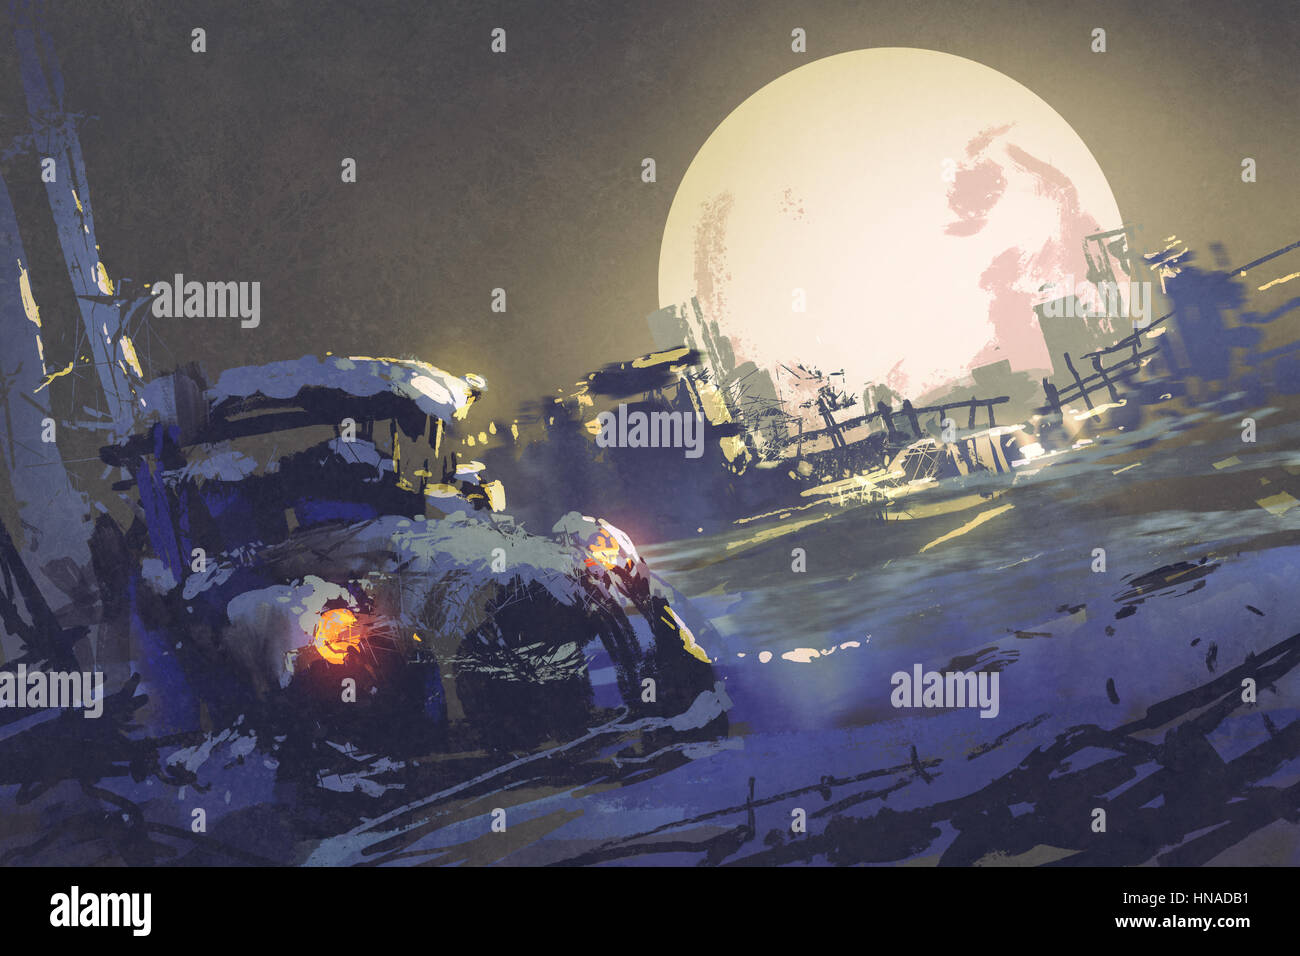 winter night scenery showing abandoned car coverd with snow and big fullmoon on background,illustration painting Stock Photo